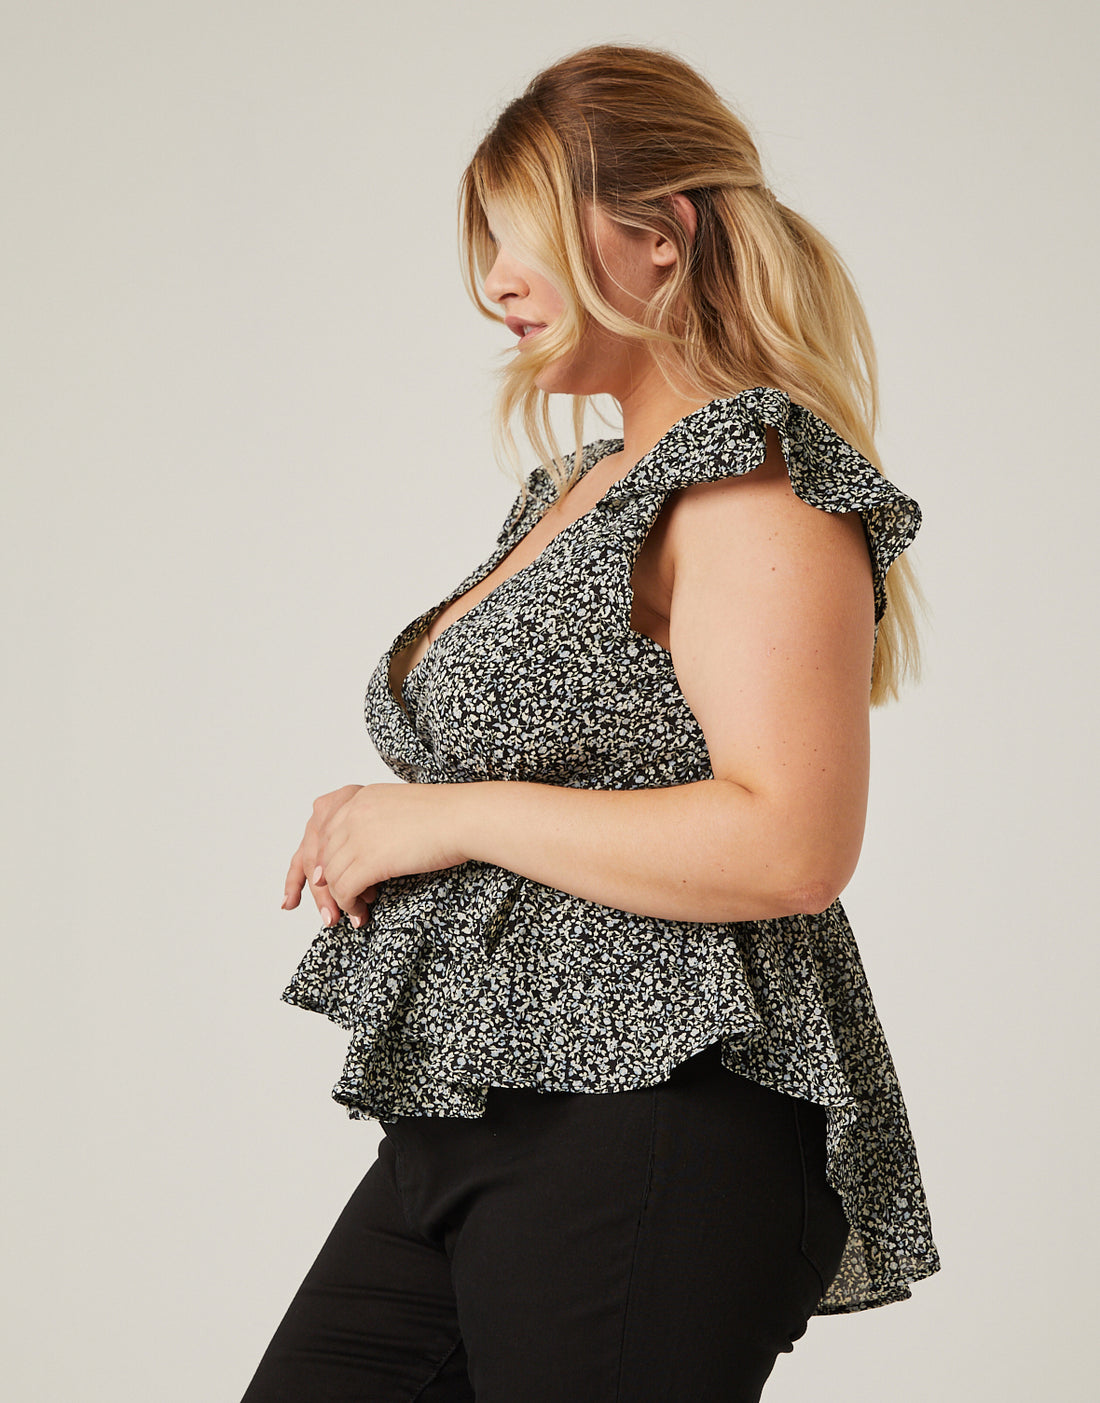 Curve Tiered Floral Peplum Top Plus Size Tops -2020AVE